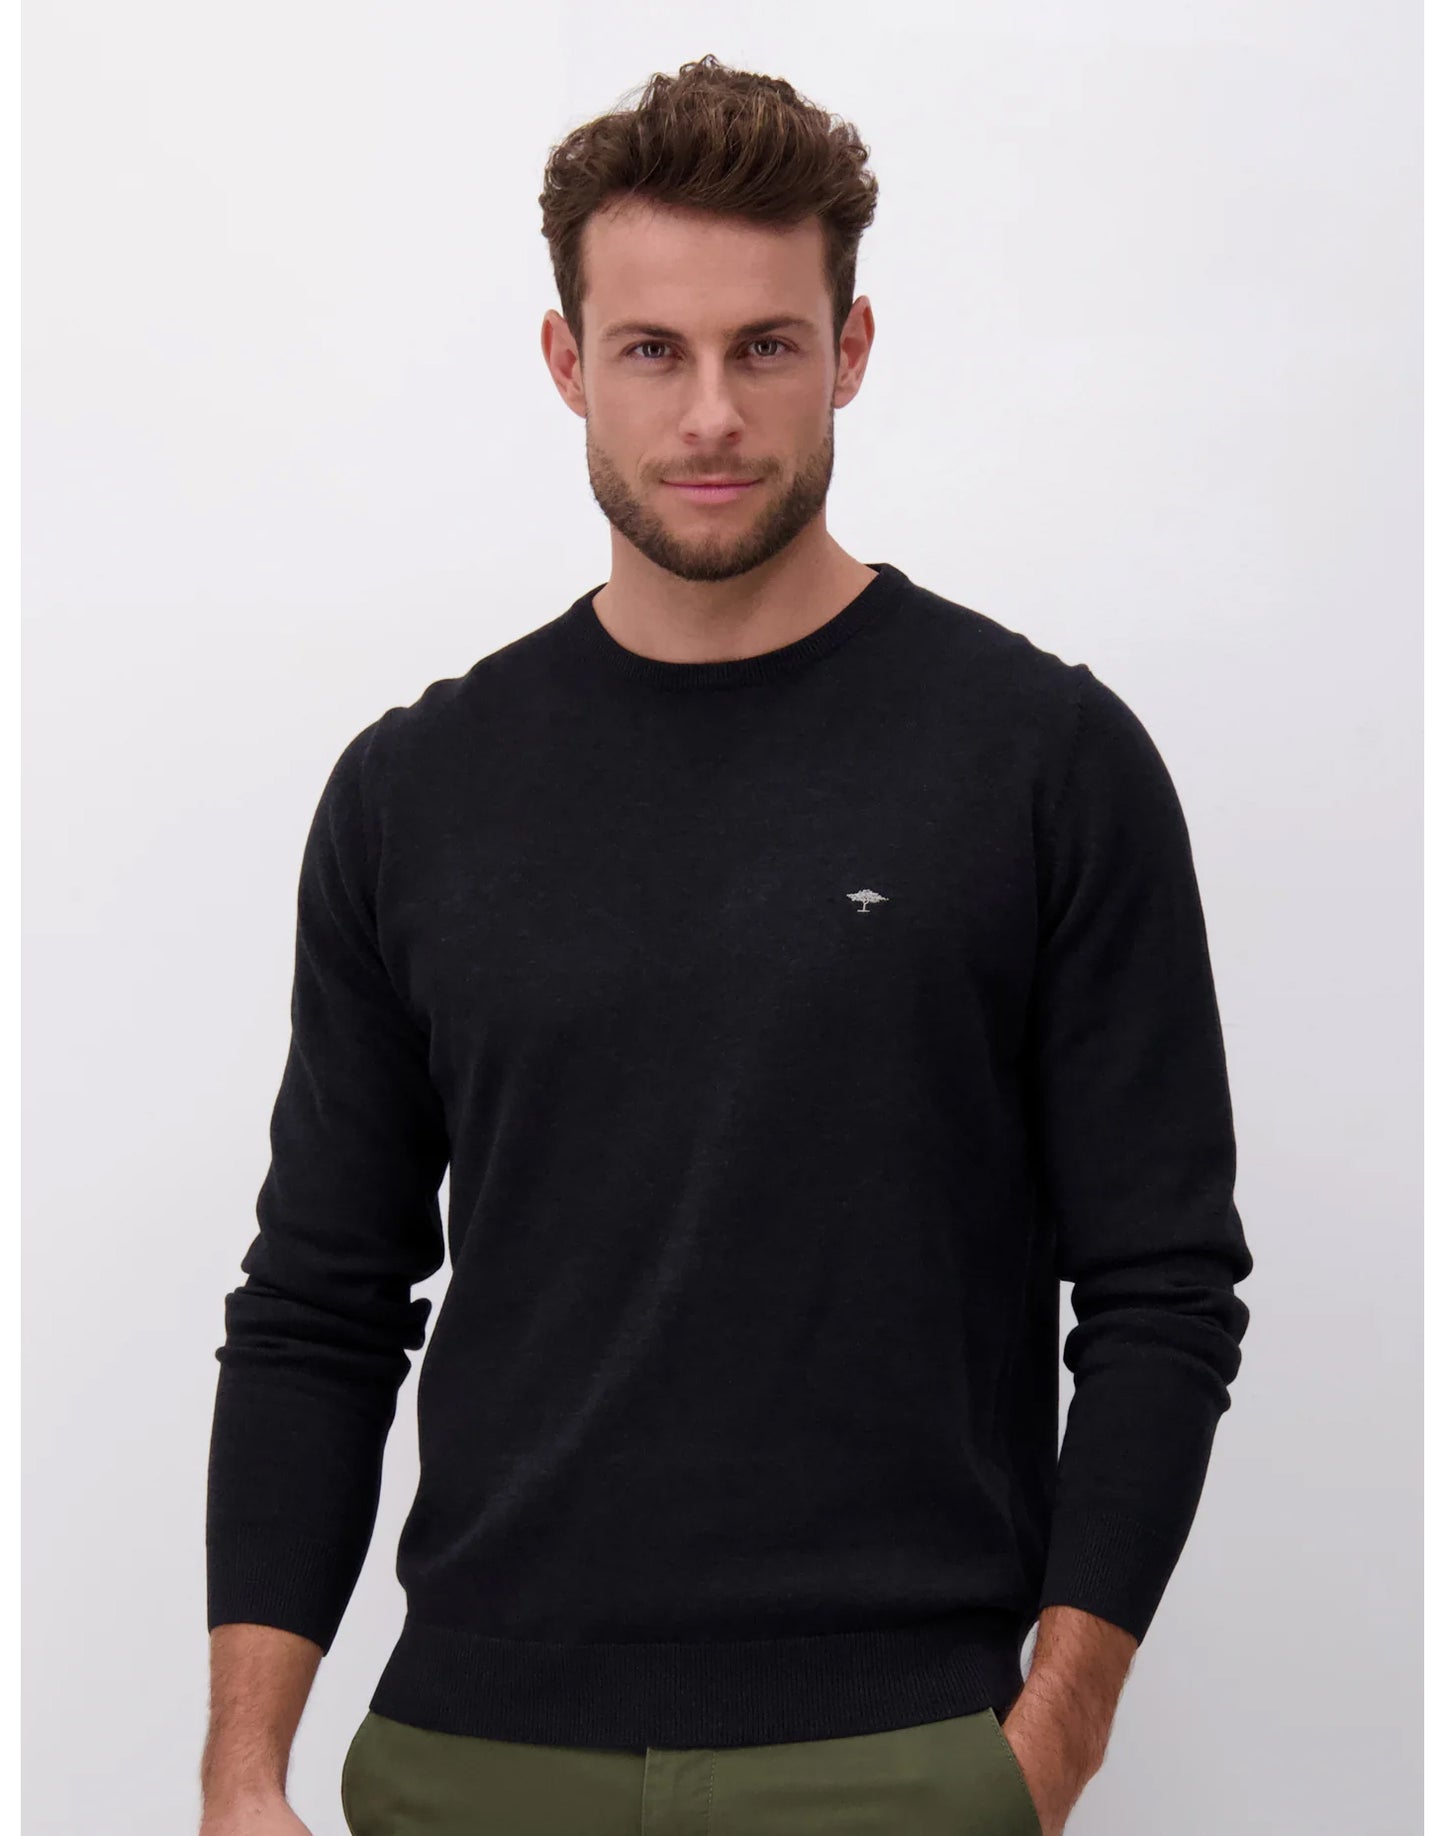 FINE KNIT SWEATER WITH O-NECK - Black